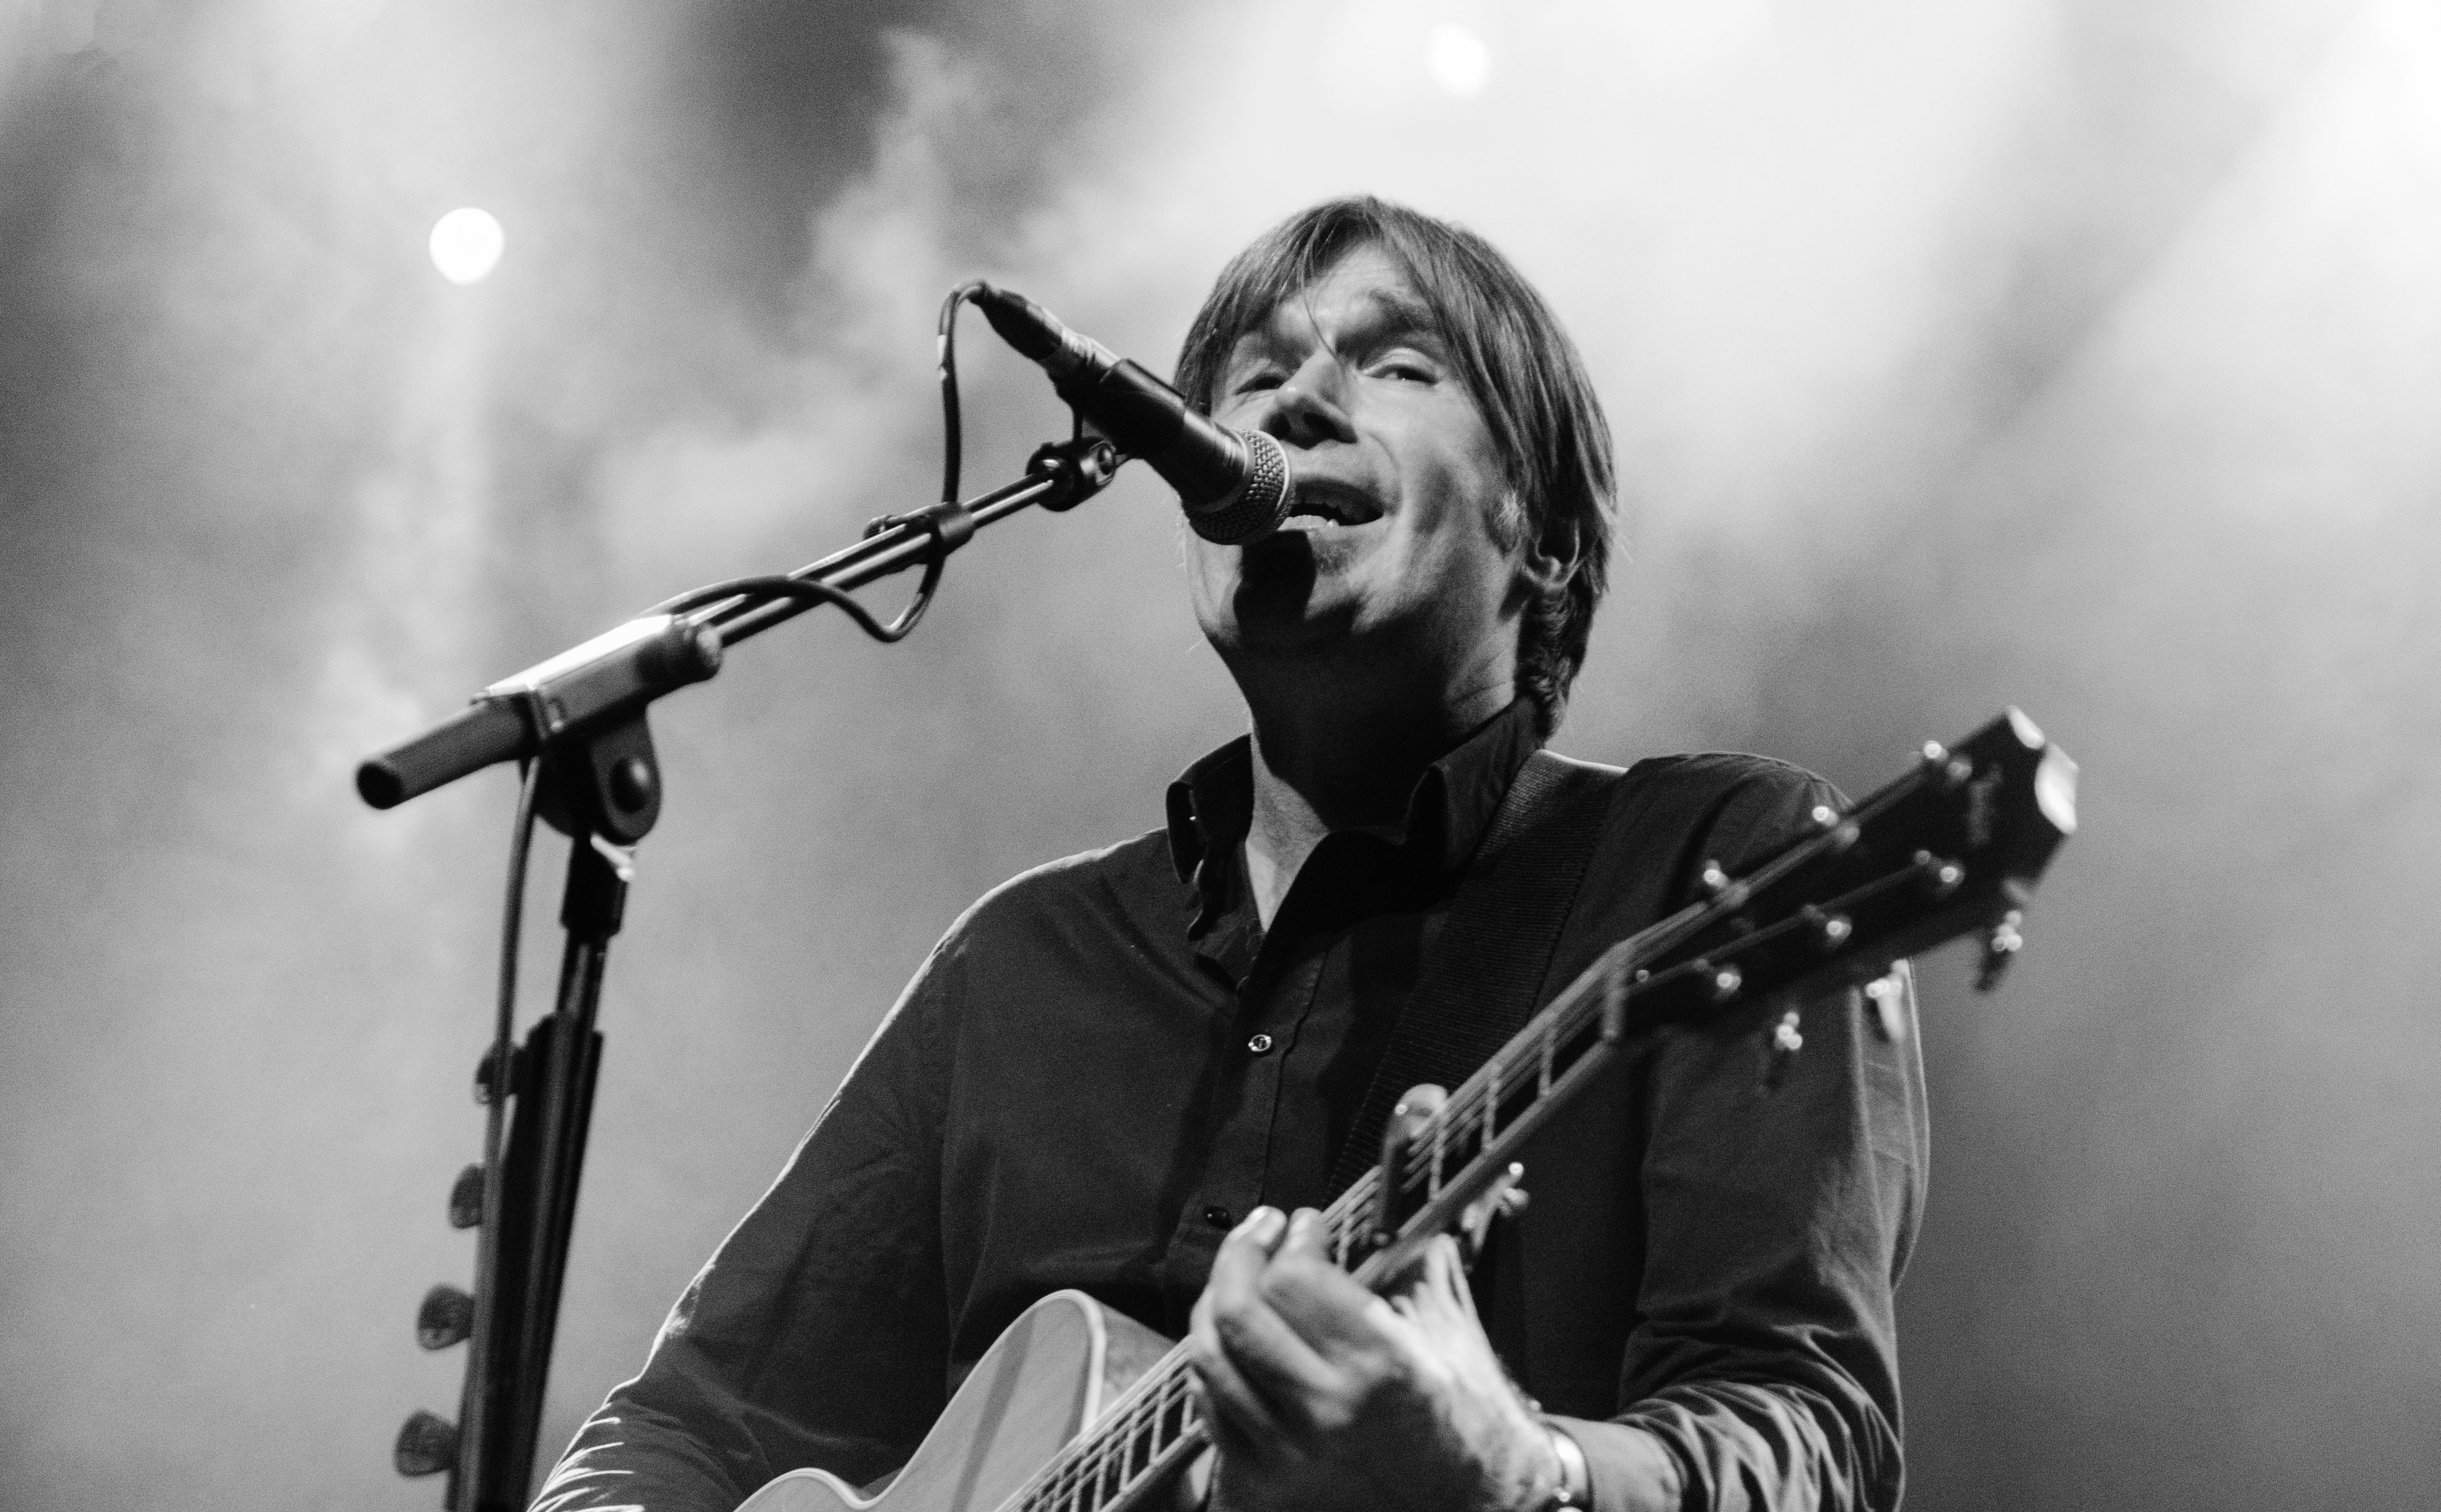 Justin Currie on stage at O2 ABC Glasgow on 14 October 2017